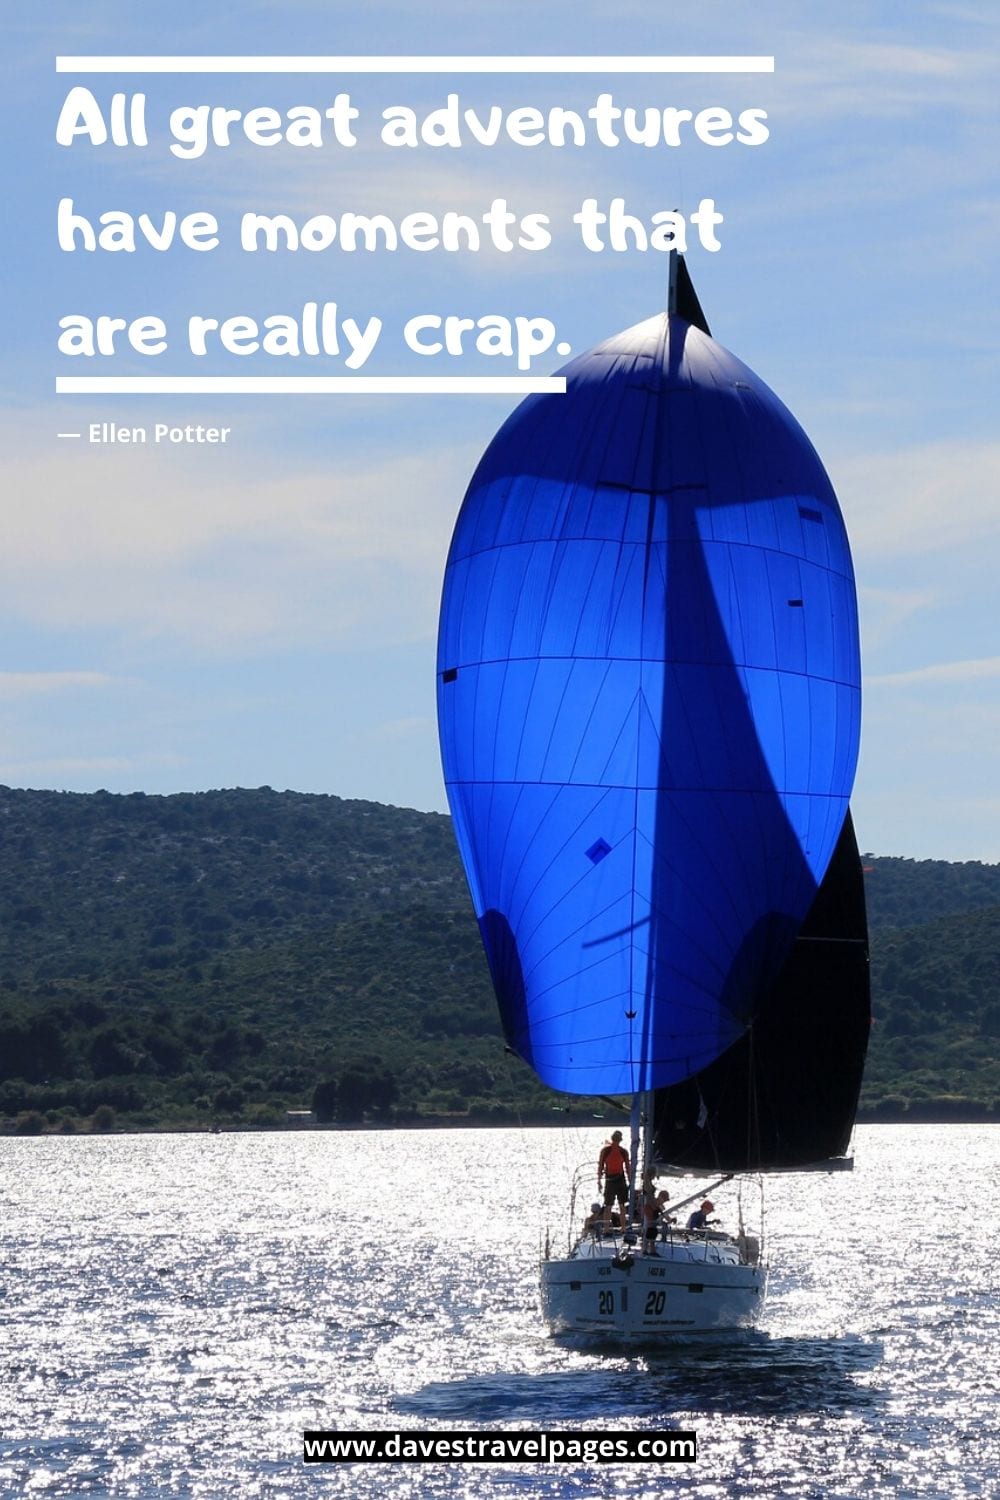 Funny adventure quotes - All great adventures have moments that are really crap.”― Ellen Potter